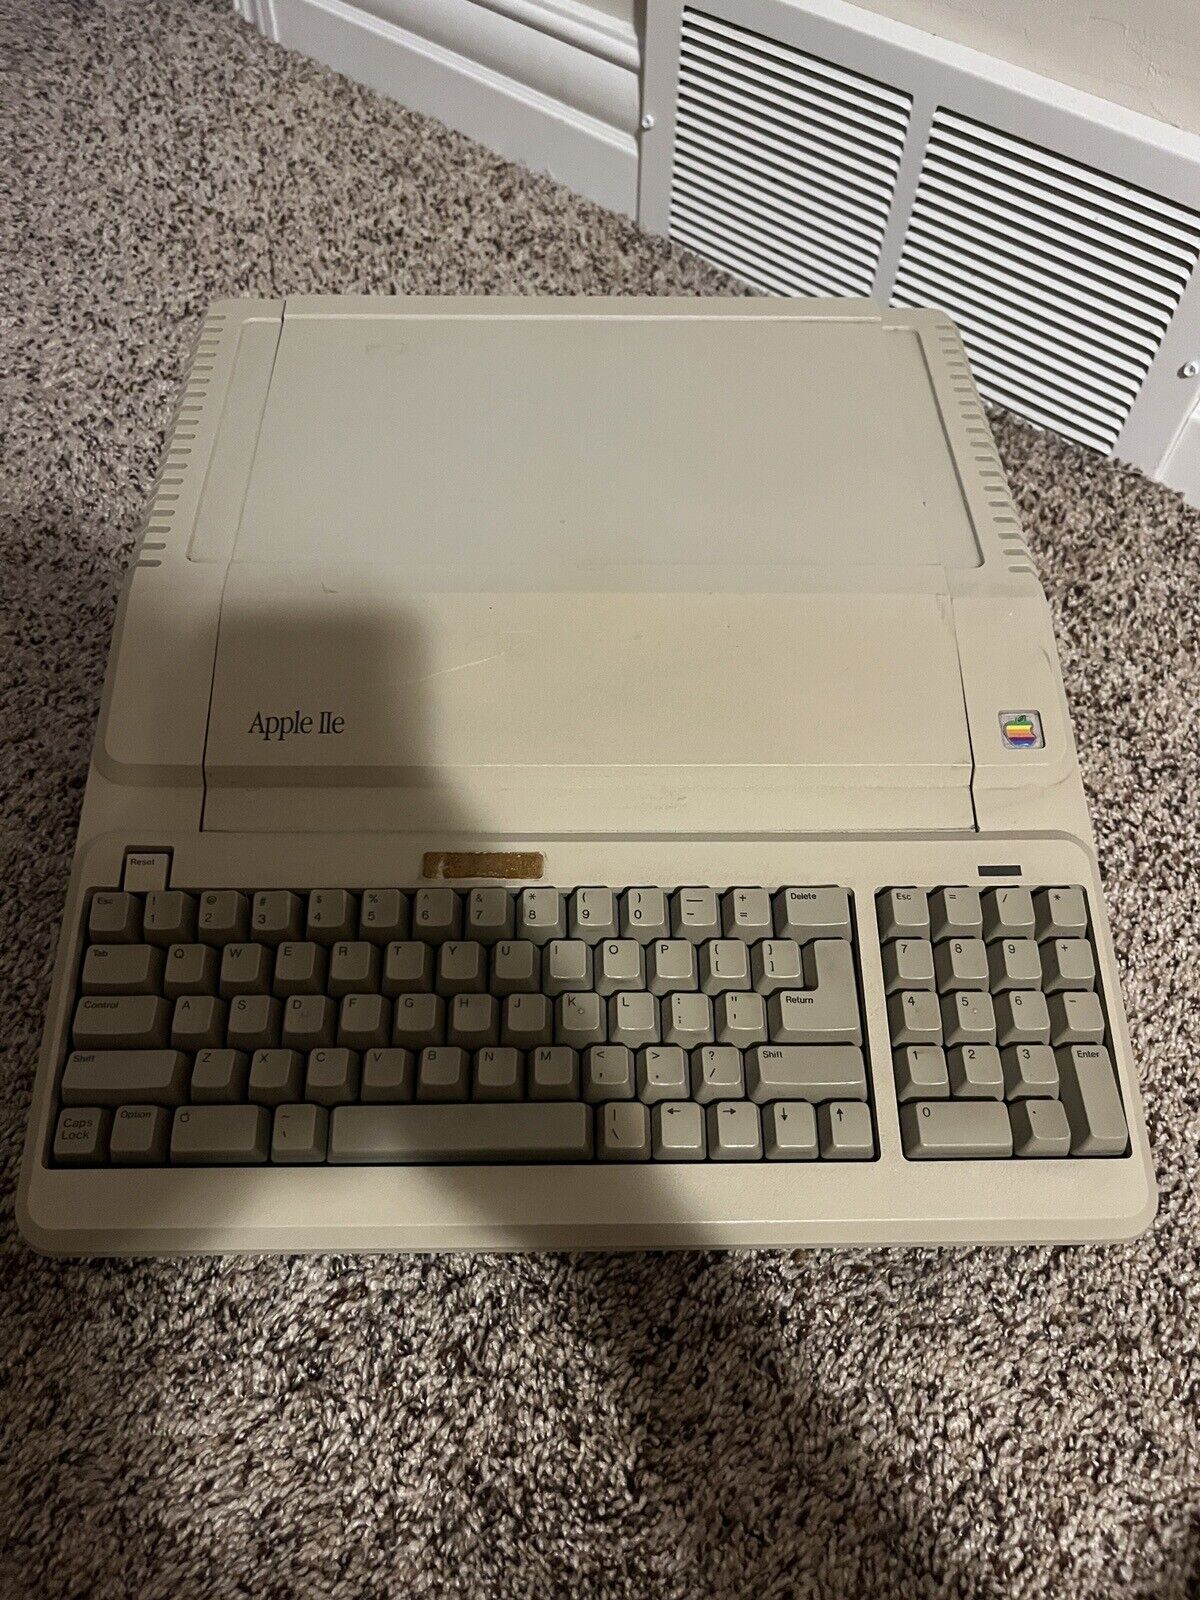 Apple IIe A2S2128 w/UniDisk Drive Included - (Tested everything works)